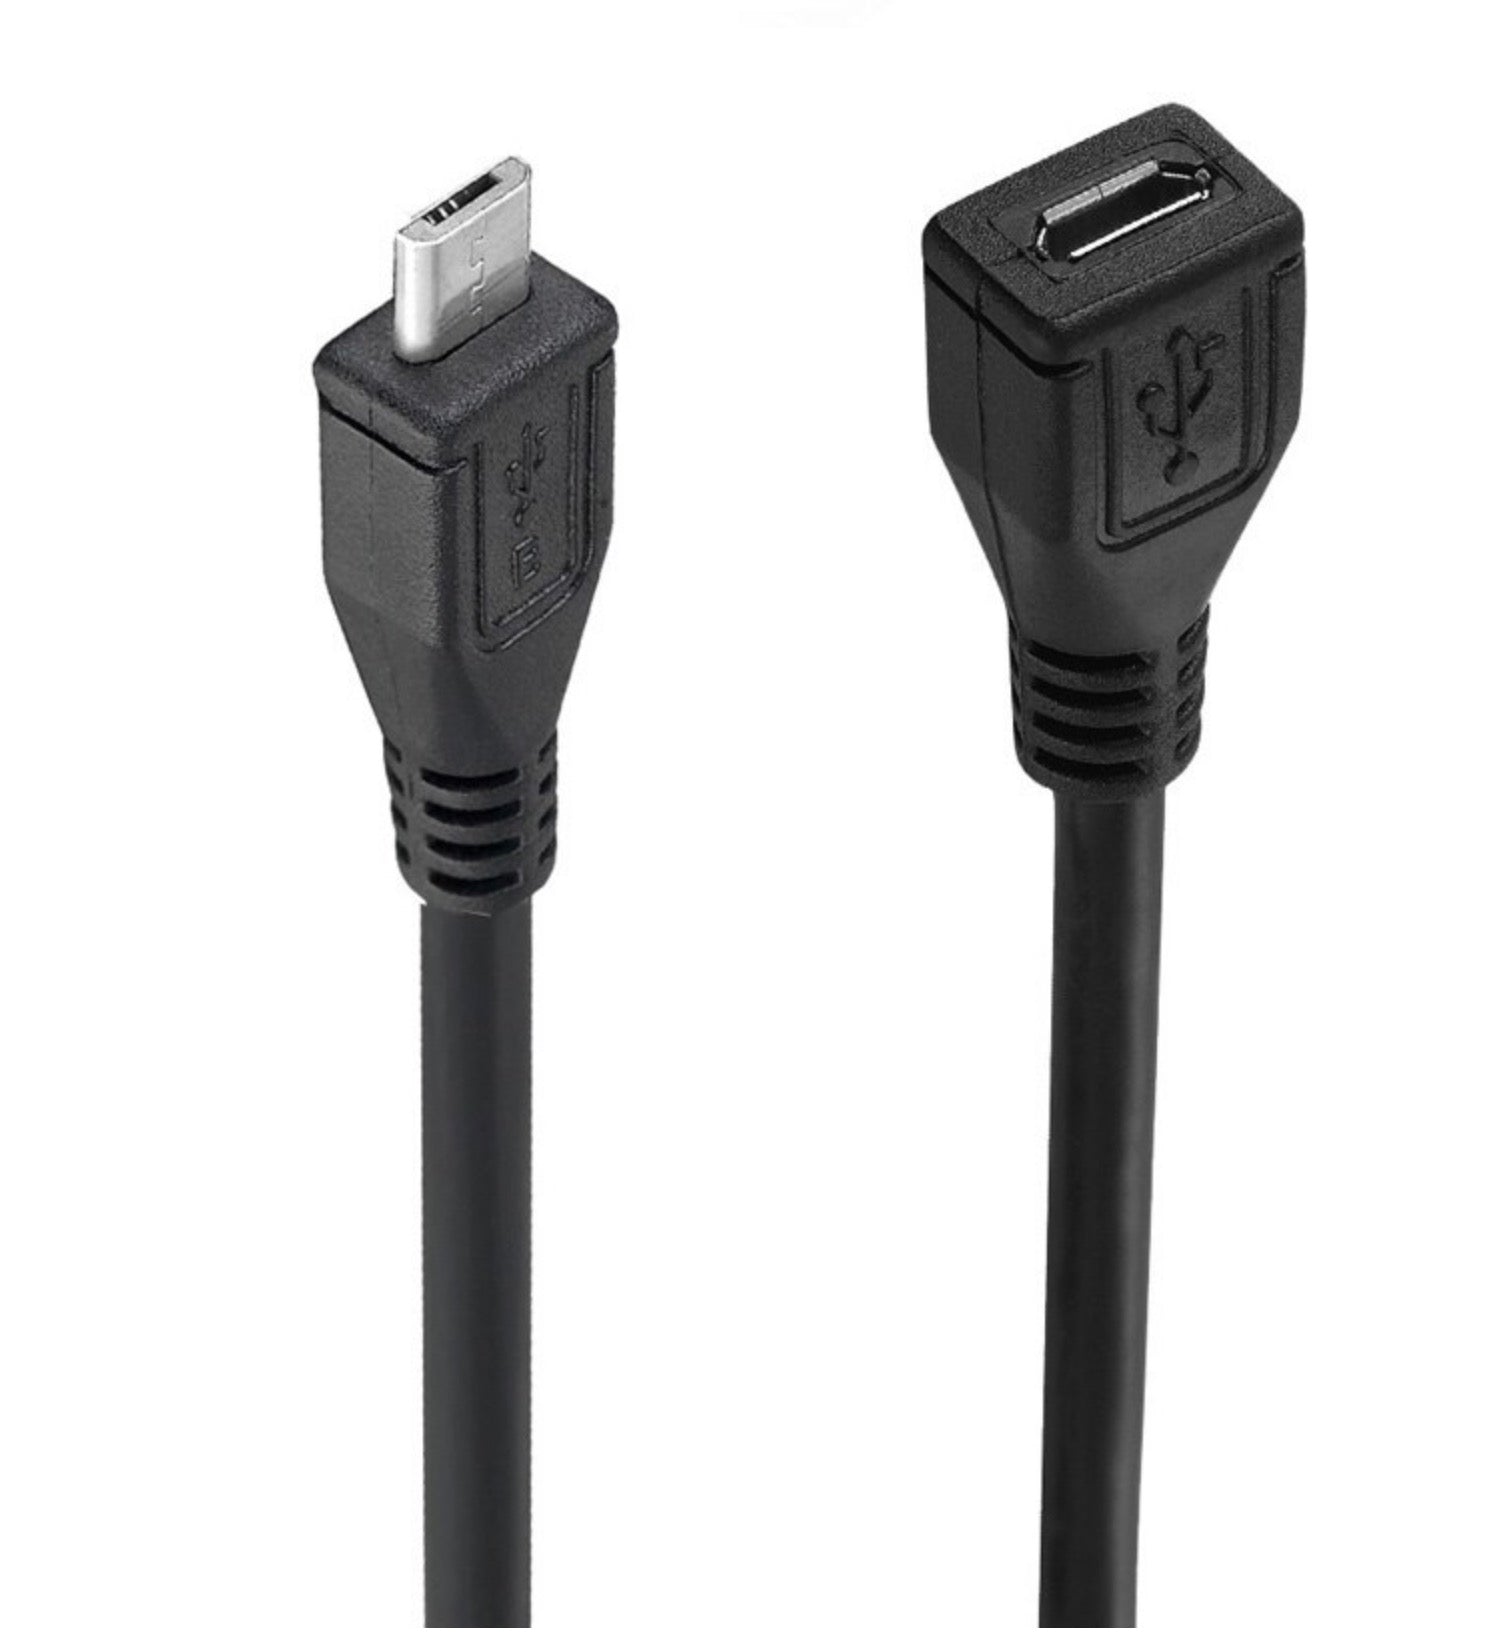 Micro USB B Male to Female Data Extension Cable 0.25m